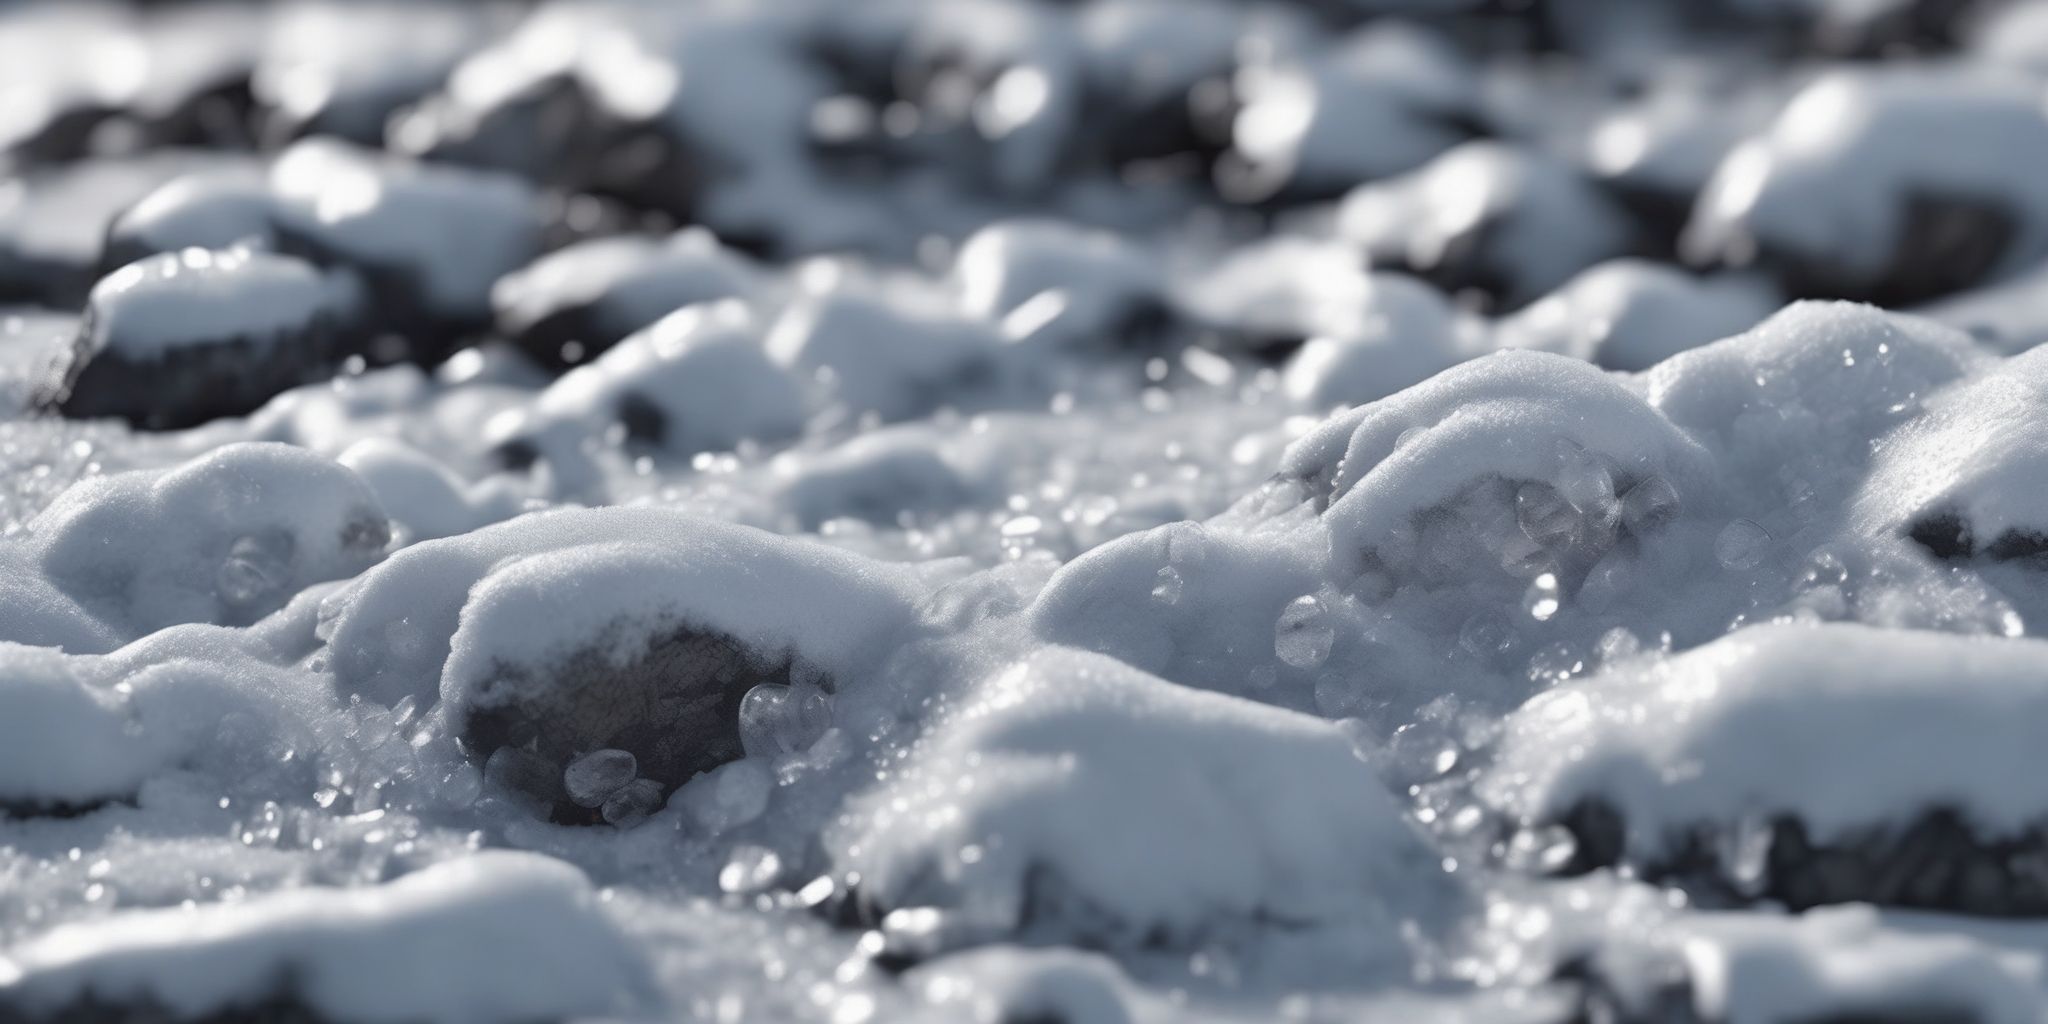 Melting snow  in realistic, photographic style